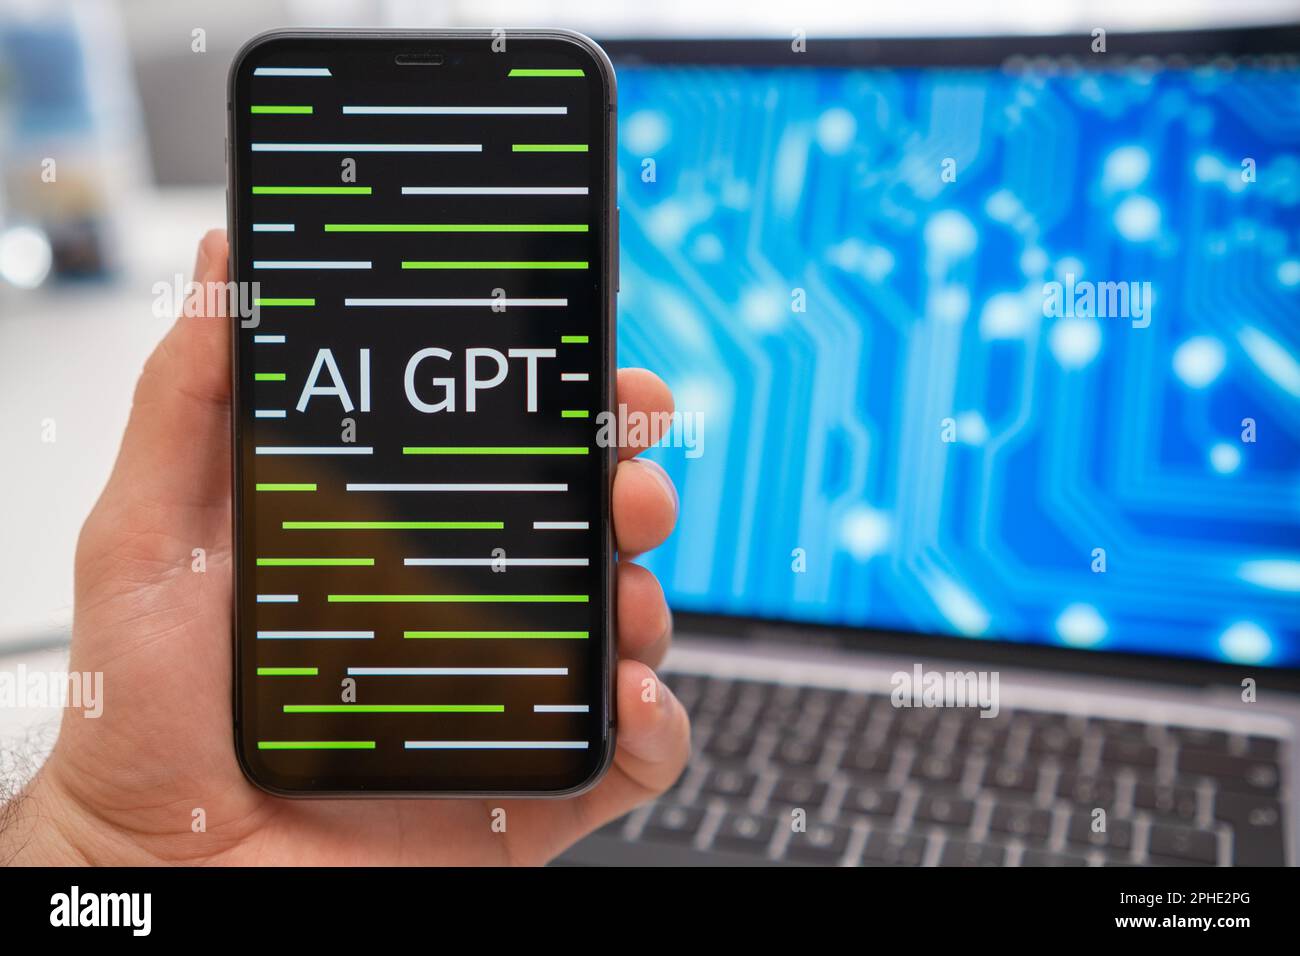 AI GPT logo of neural network on the screen of smartphone in mans hand and laptop with neuronet on the splash screen on the background. Artificial intelligence concept. March 2023, Prague, Czech Republic.  Stock Photo